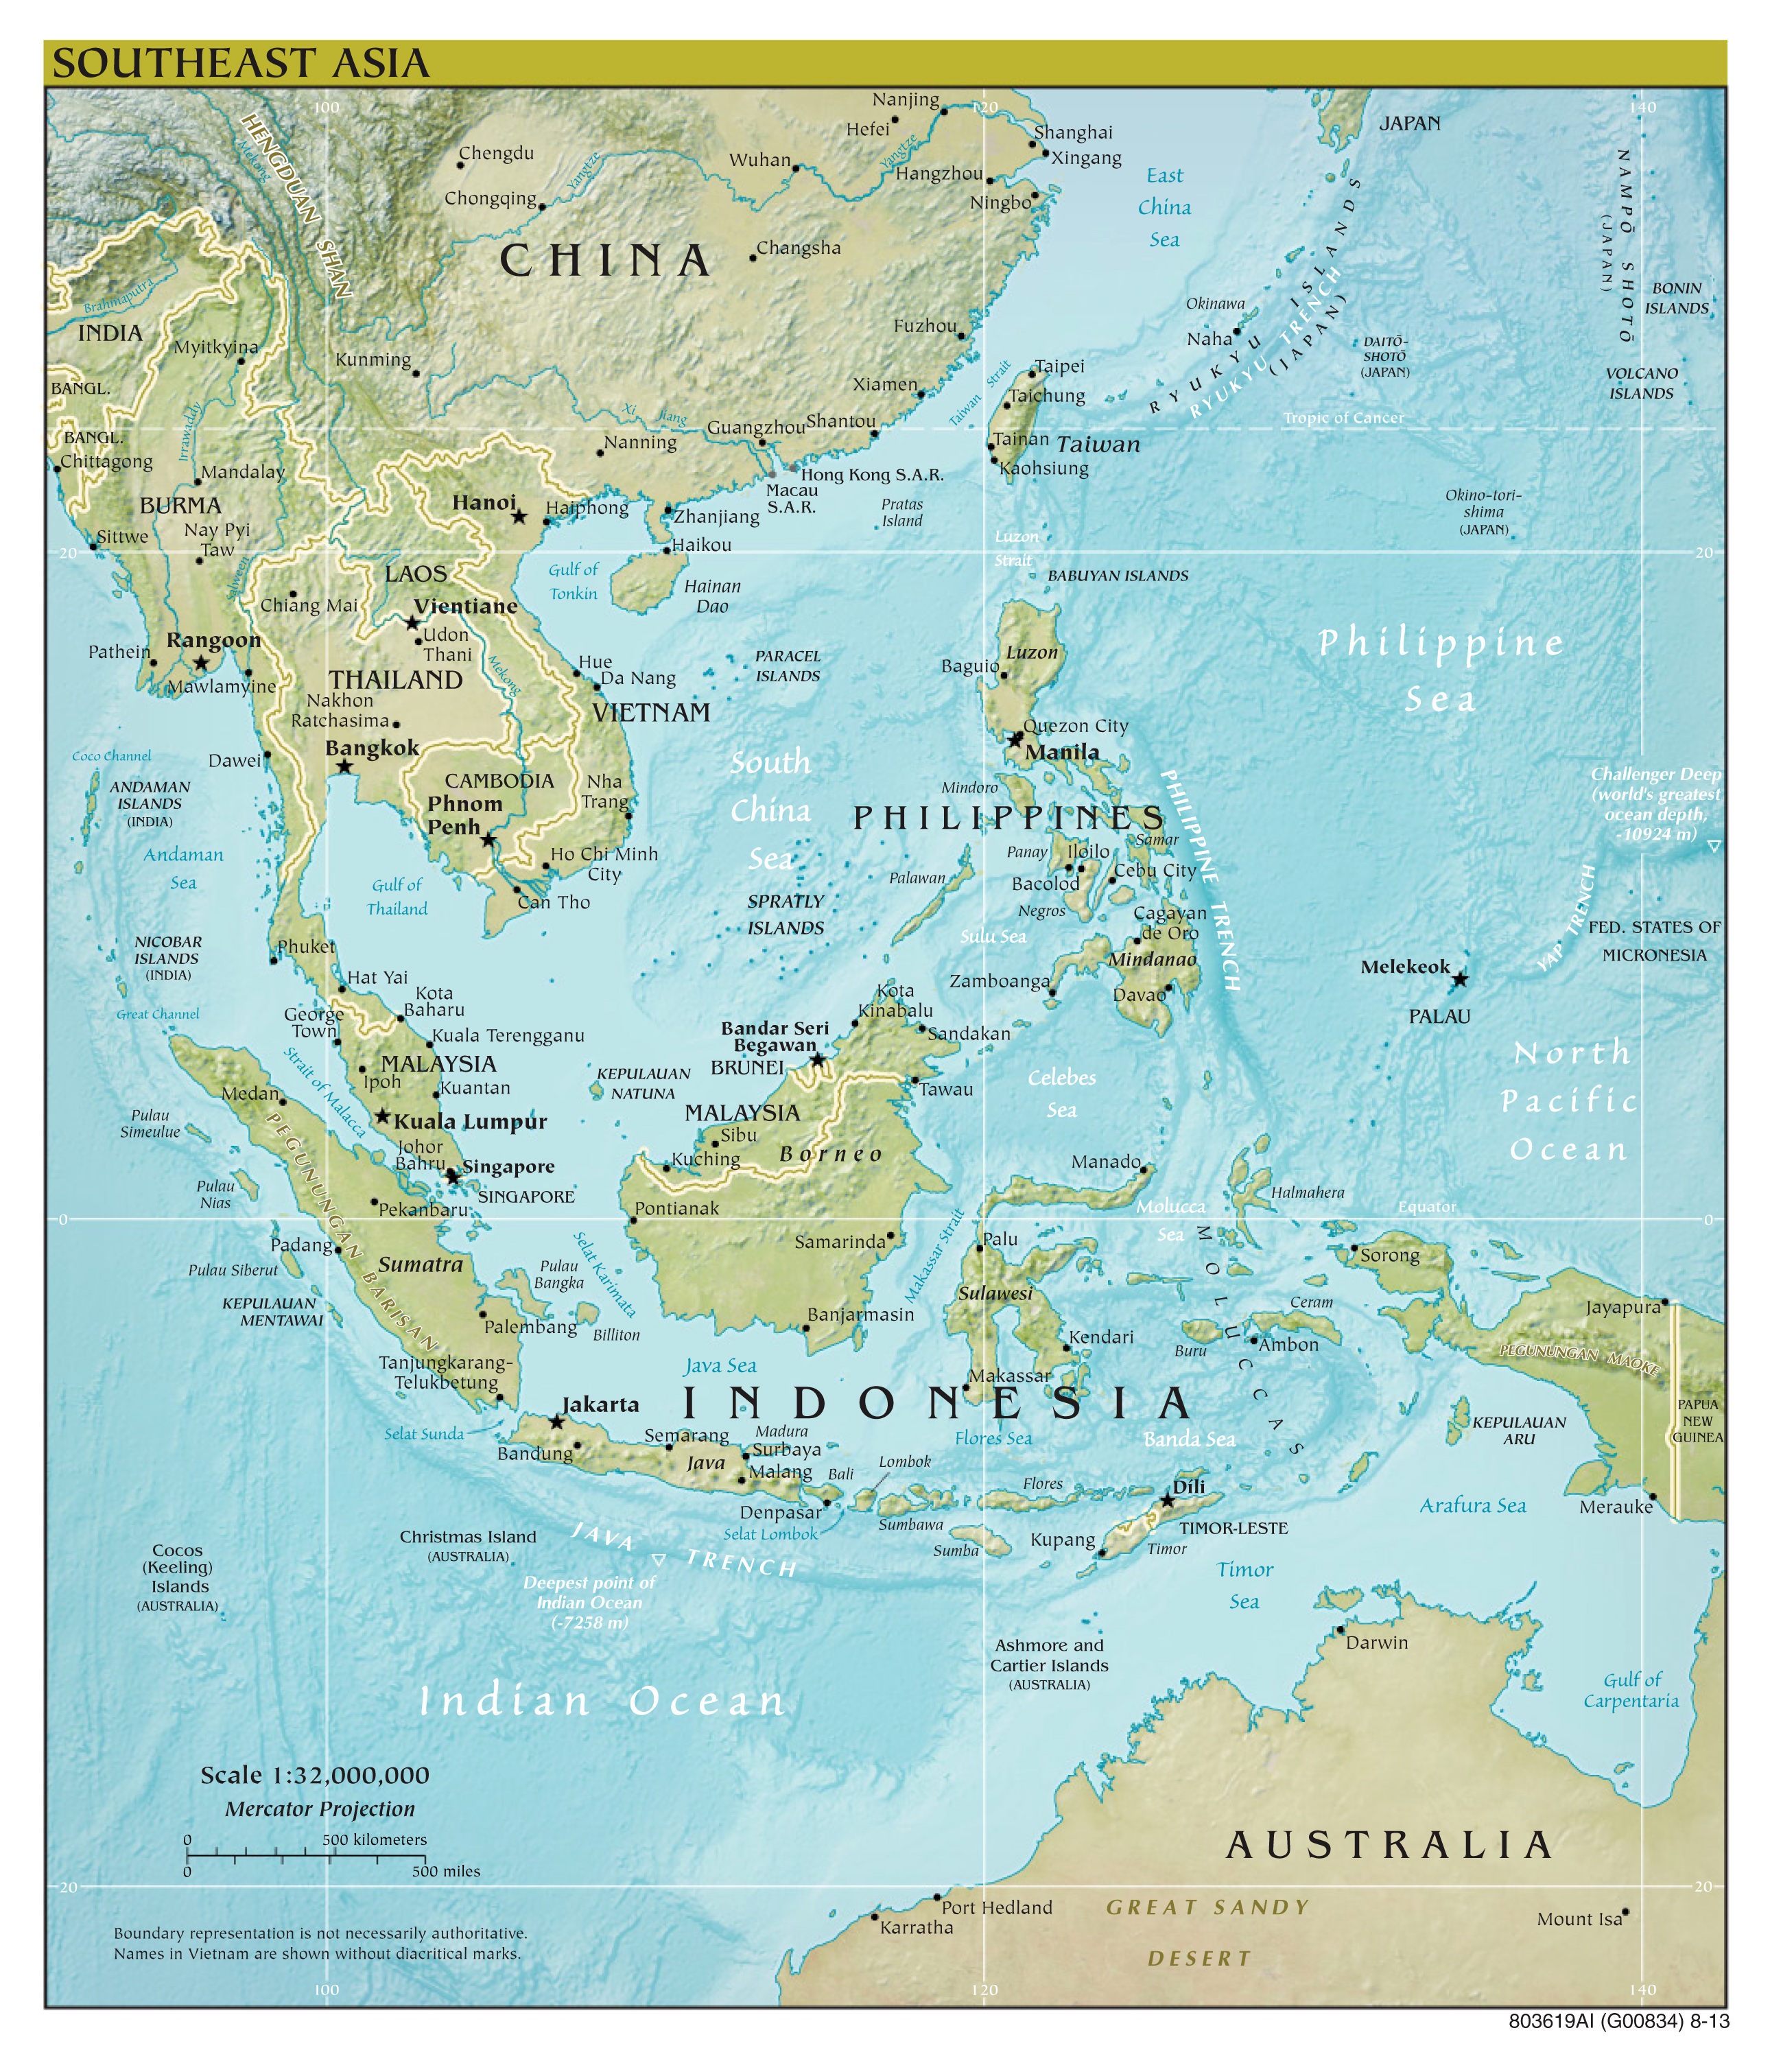 large-detailed-political-map-of-asia-with-relief-major-cities-and-vrogue